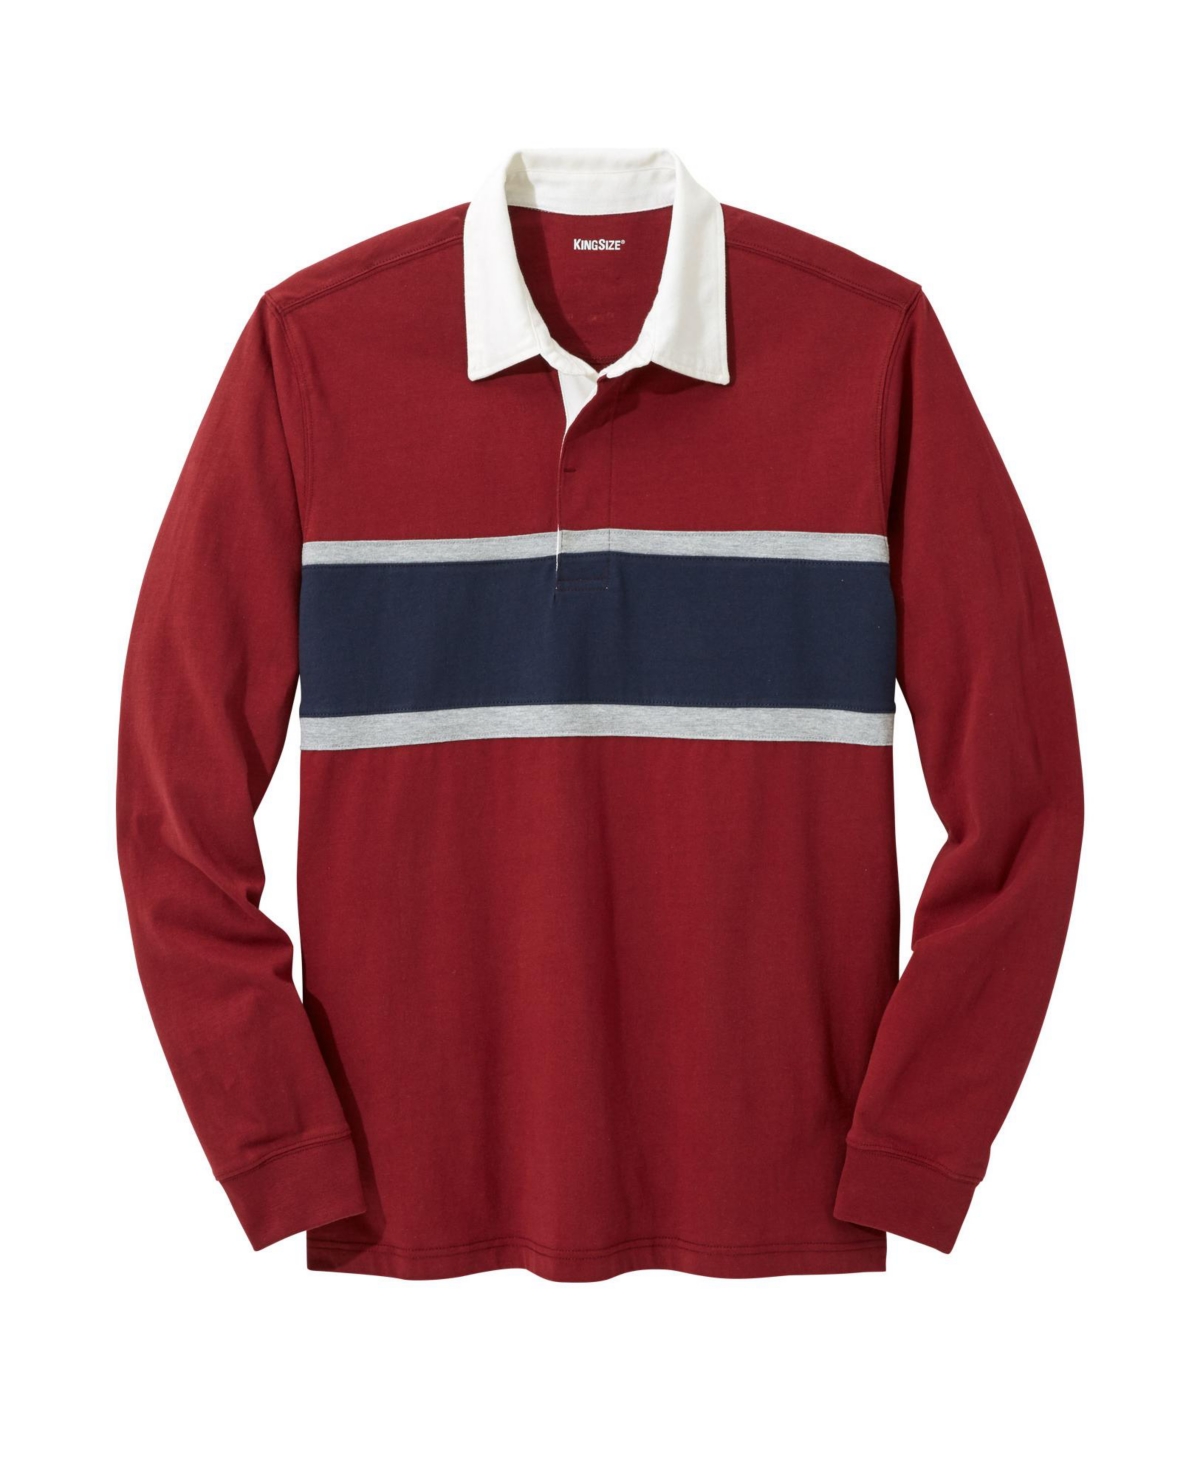 Big & Tall Long-Sleeve Rugby Polo - Rich burgundy rugby